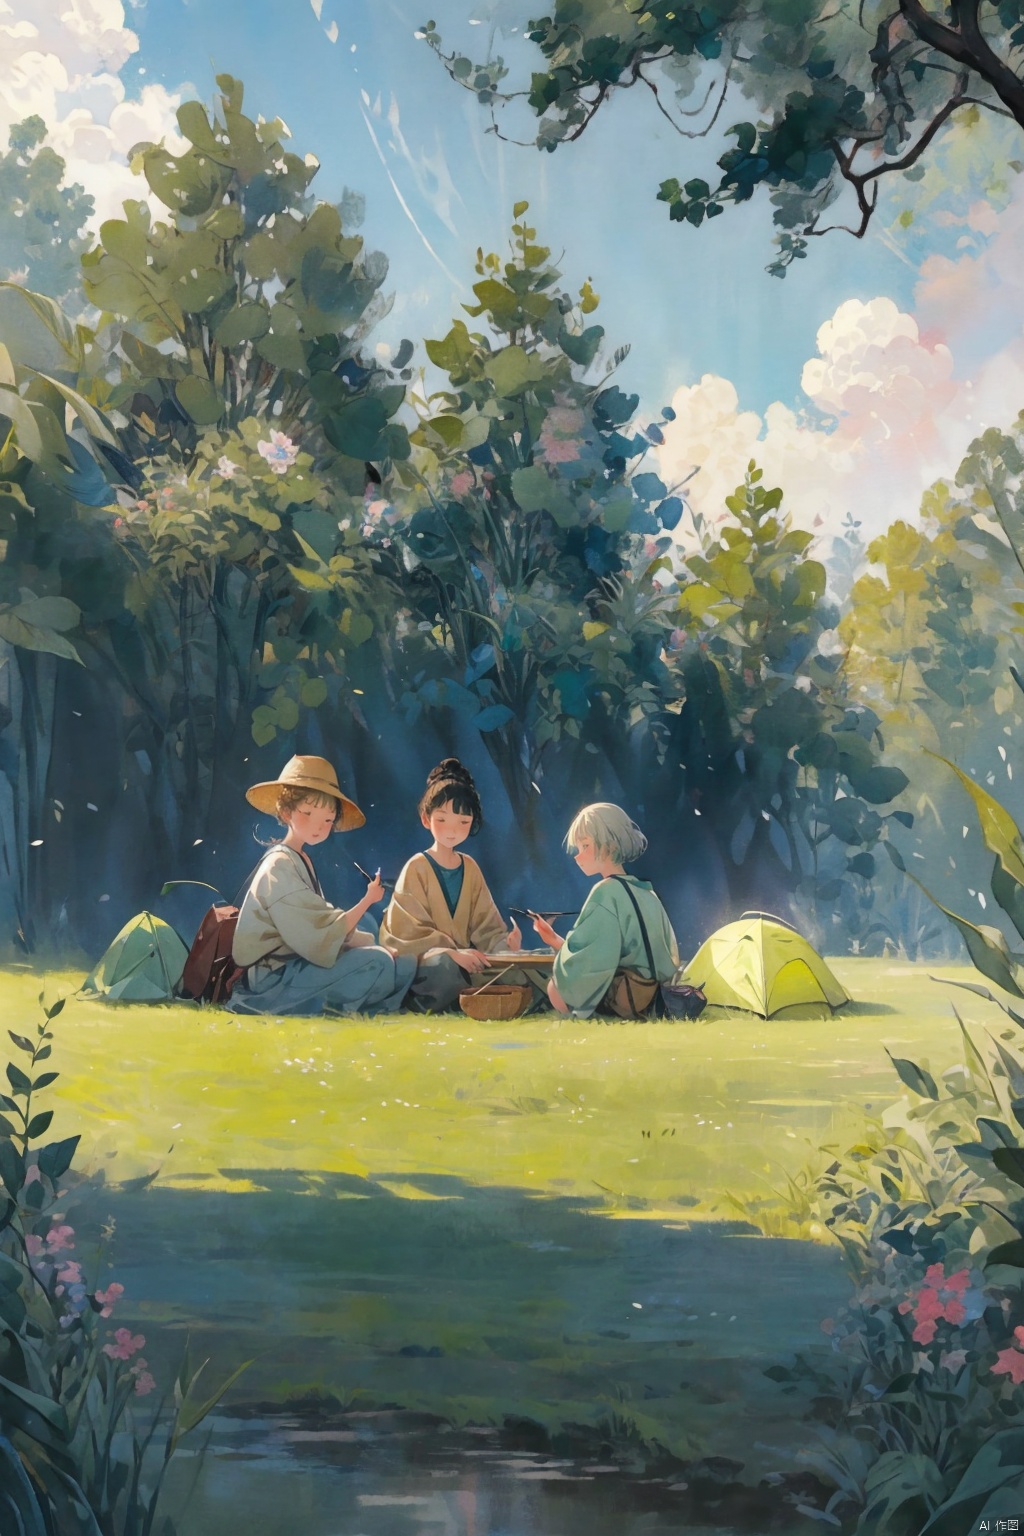  Spring party, grass, trees, and buddies camping on the spring grass, with bright blue and green colors, rich details, joy, natural harmony, and outdoor illustration style shooting. Wide angle lens, natural light, joy, liveliness, illustration style, bright colors, natural elements, joy, group smiles, and summer atmosphere., cozy anime, watercolor, cozy animation scenes, mxianv